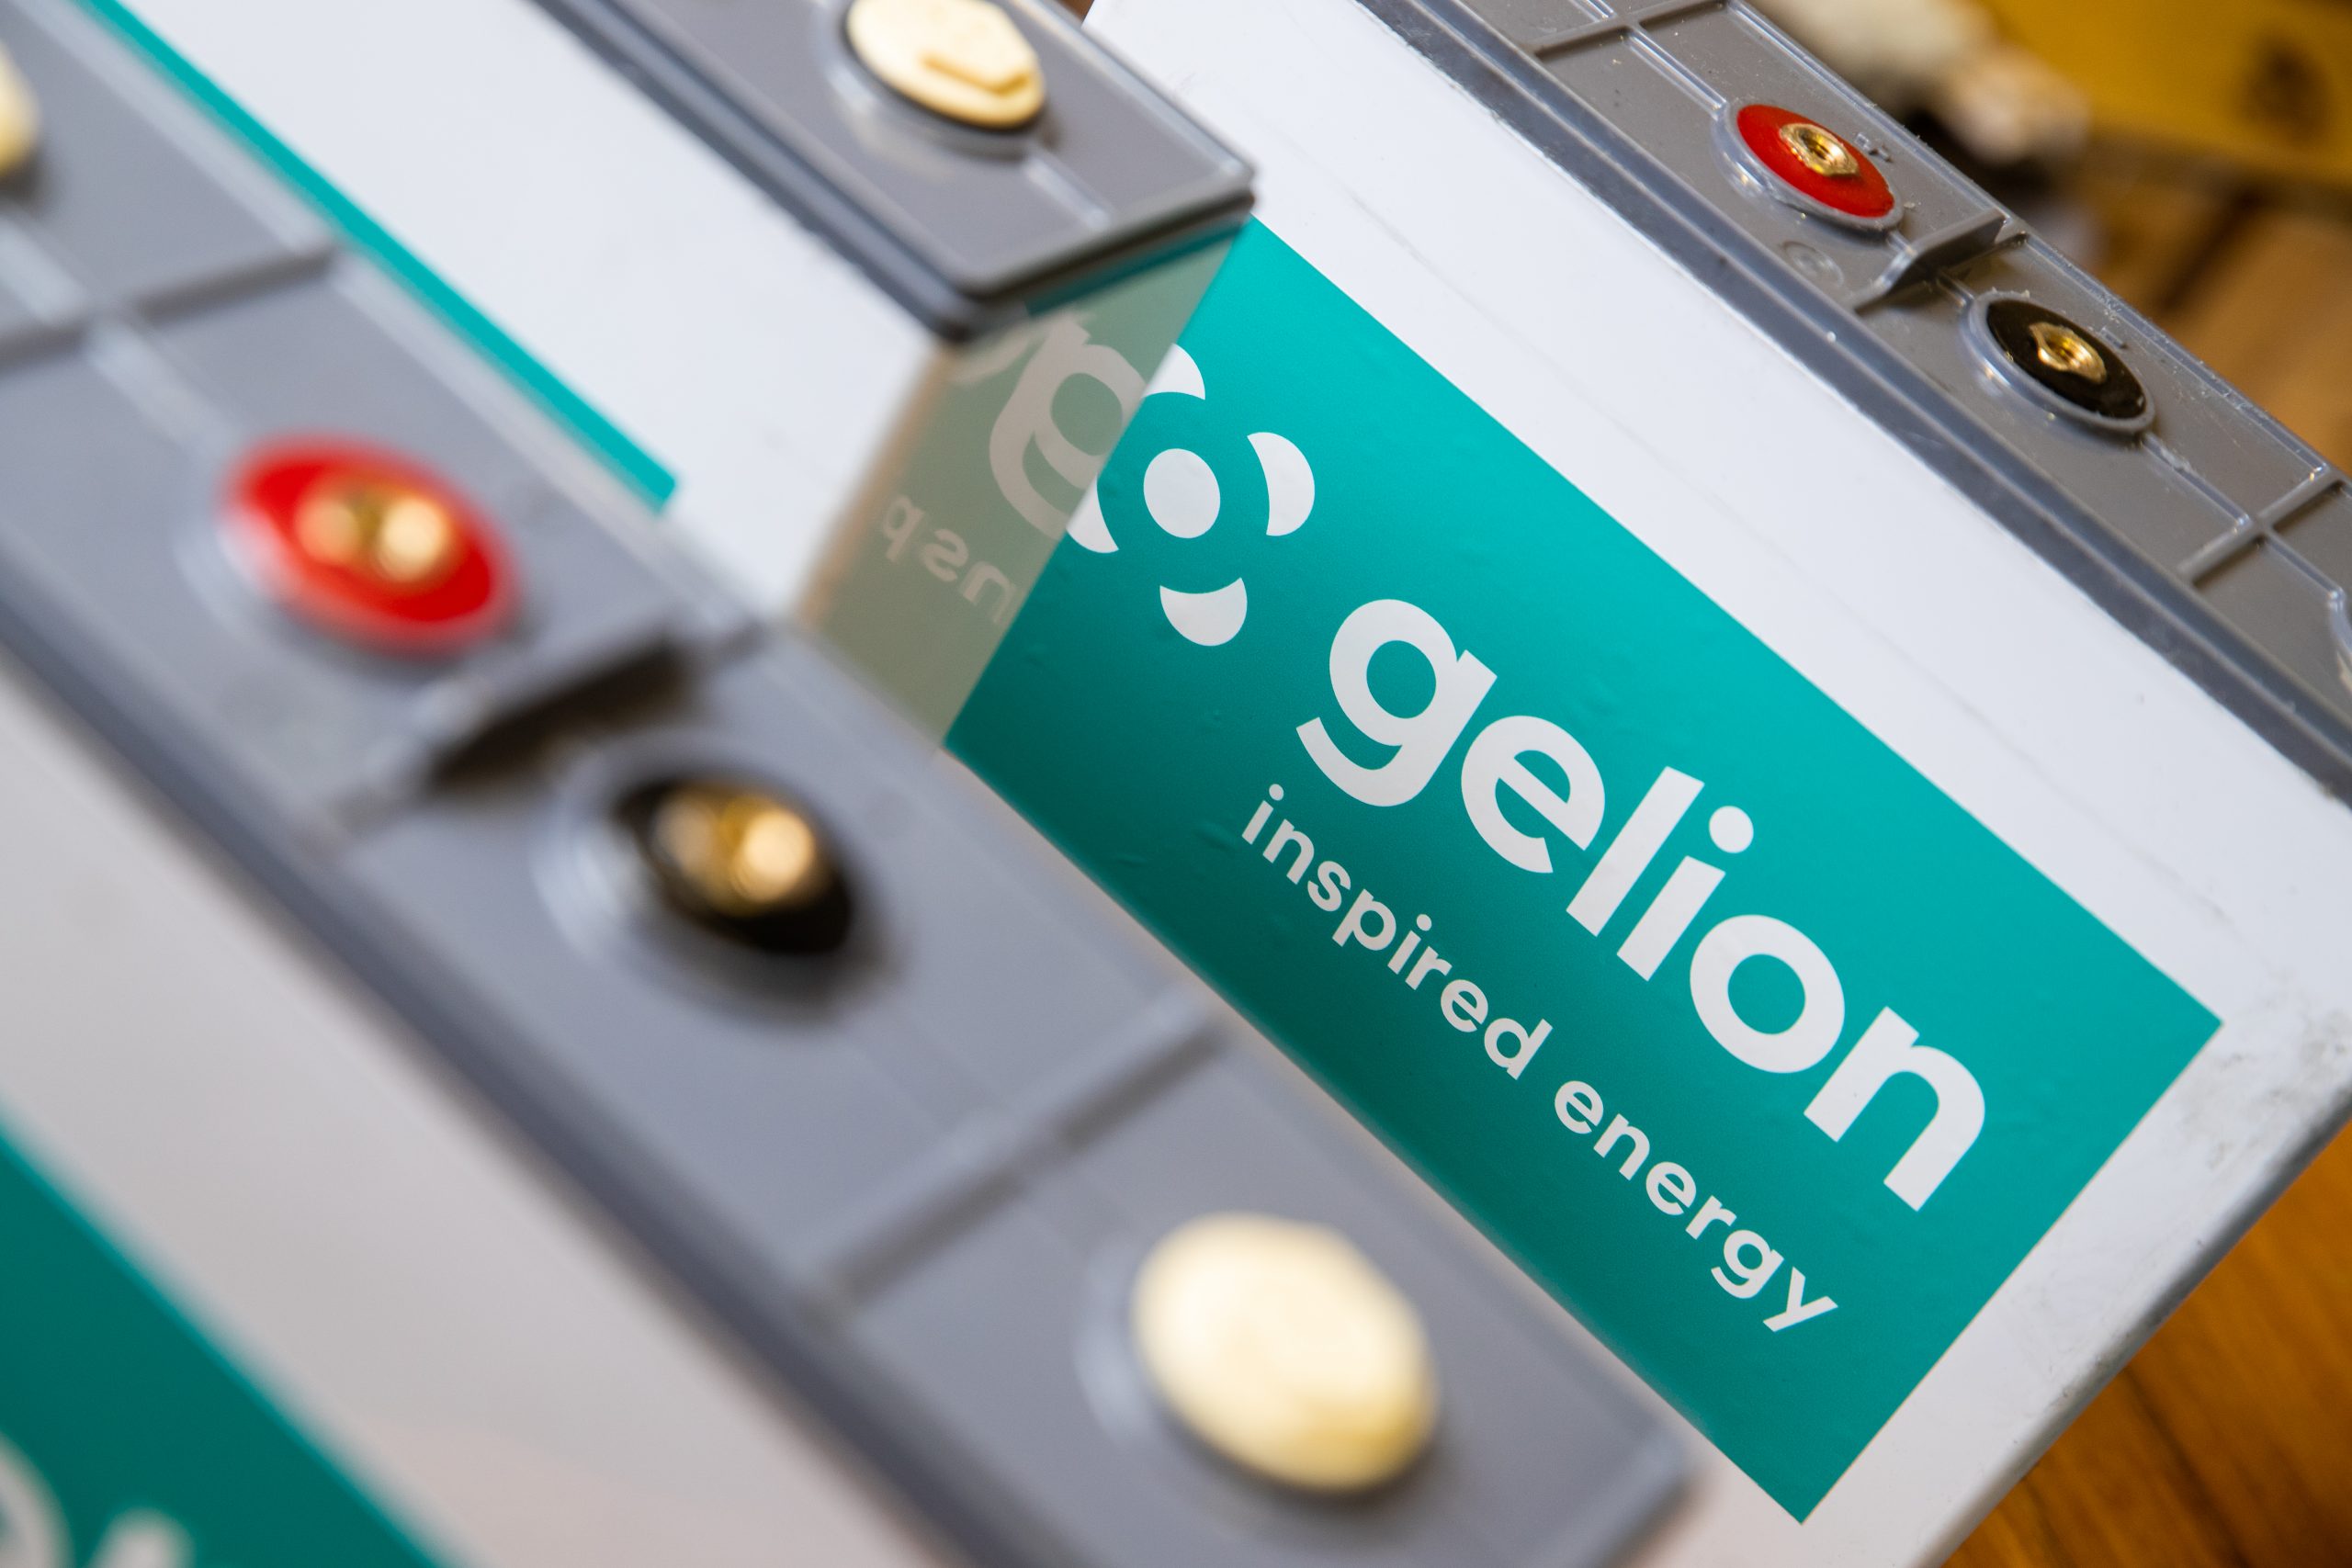 London Stock Exchange welcomes Gelion plc to AIM - Gelion - Inspired Energy